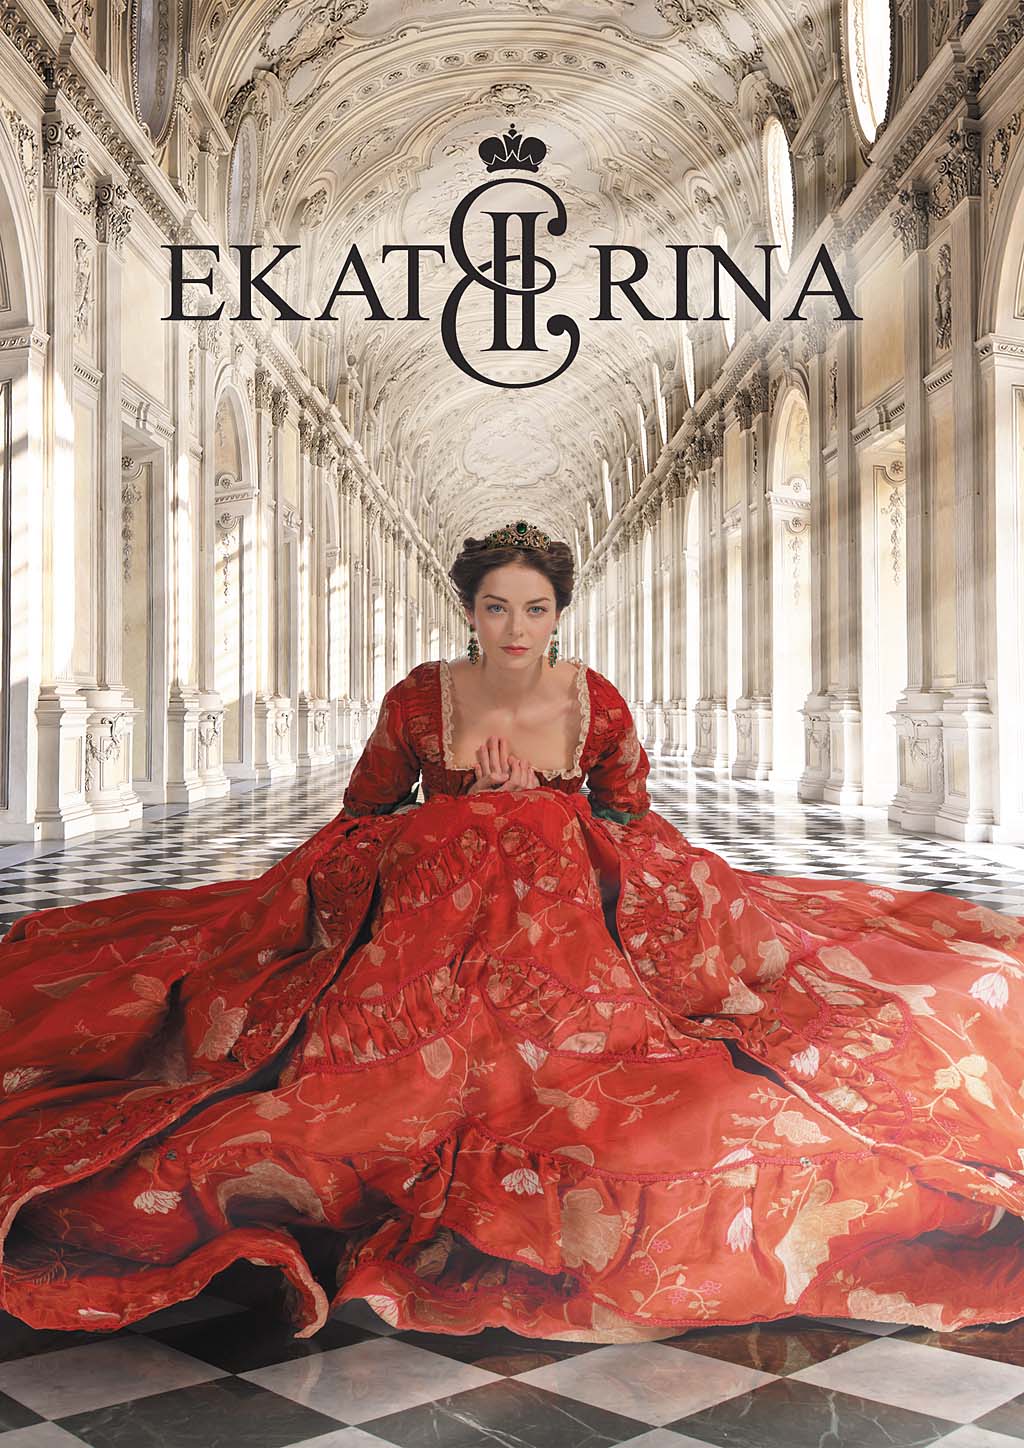 EKATERINA AND ASH, RUSSIAN TV SERIES,  TO BE SHOWN IN MONGOLIA